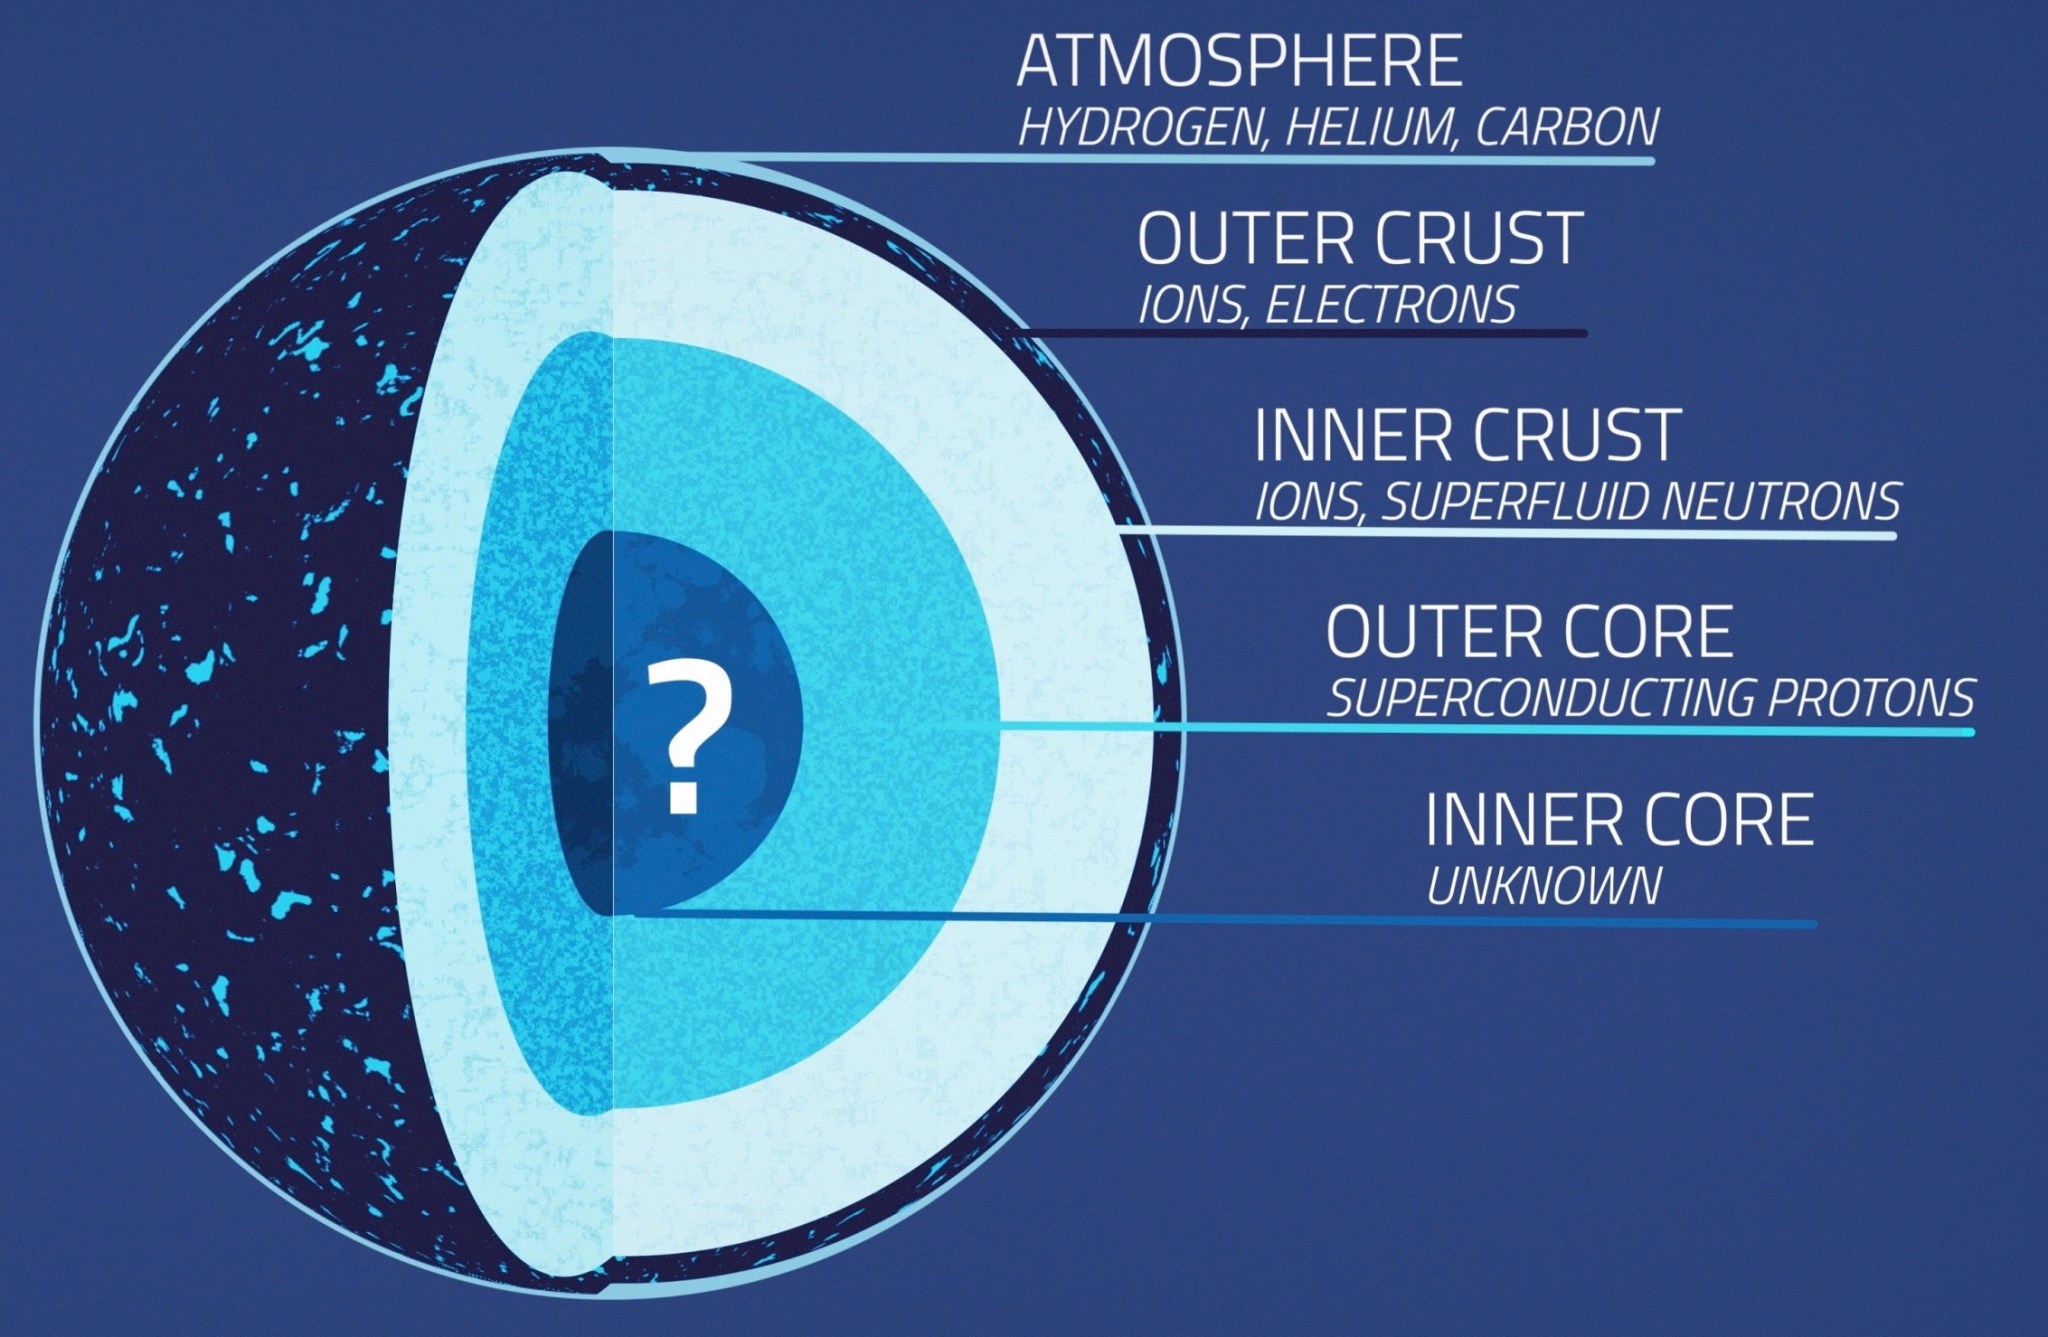 The inner layers of a neutron star are visible and labeled.